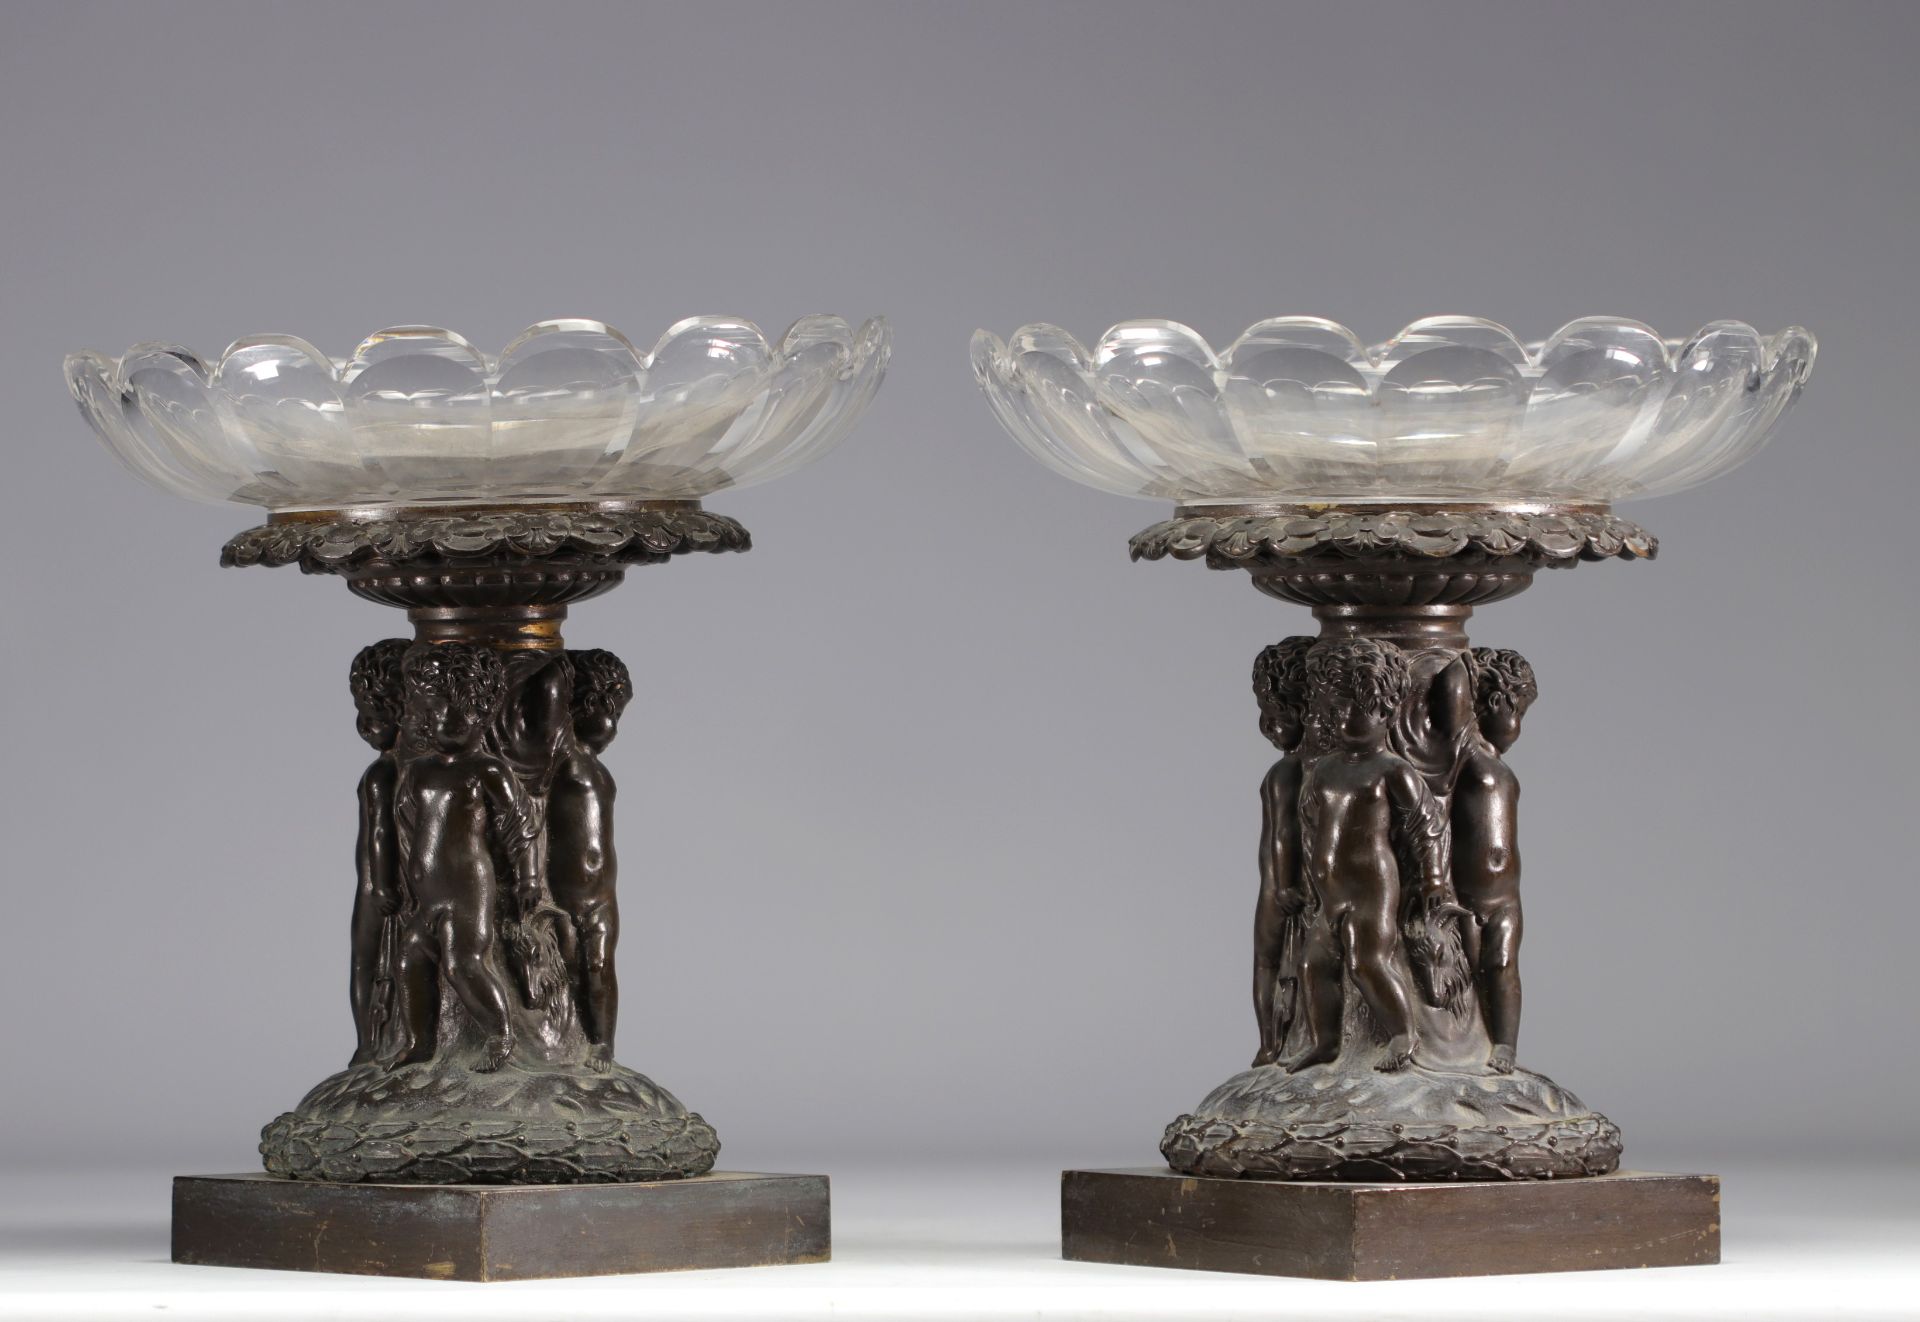 (2) Pair of large crystal bowls on bronze feet depicting a group of children from 19th century - Image 2 of 3